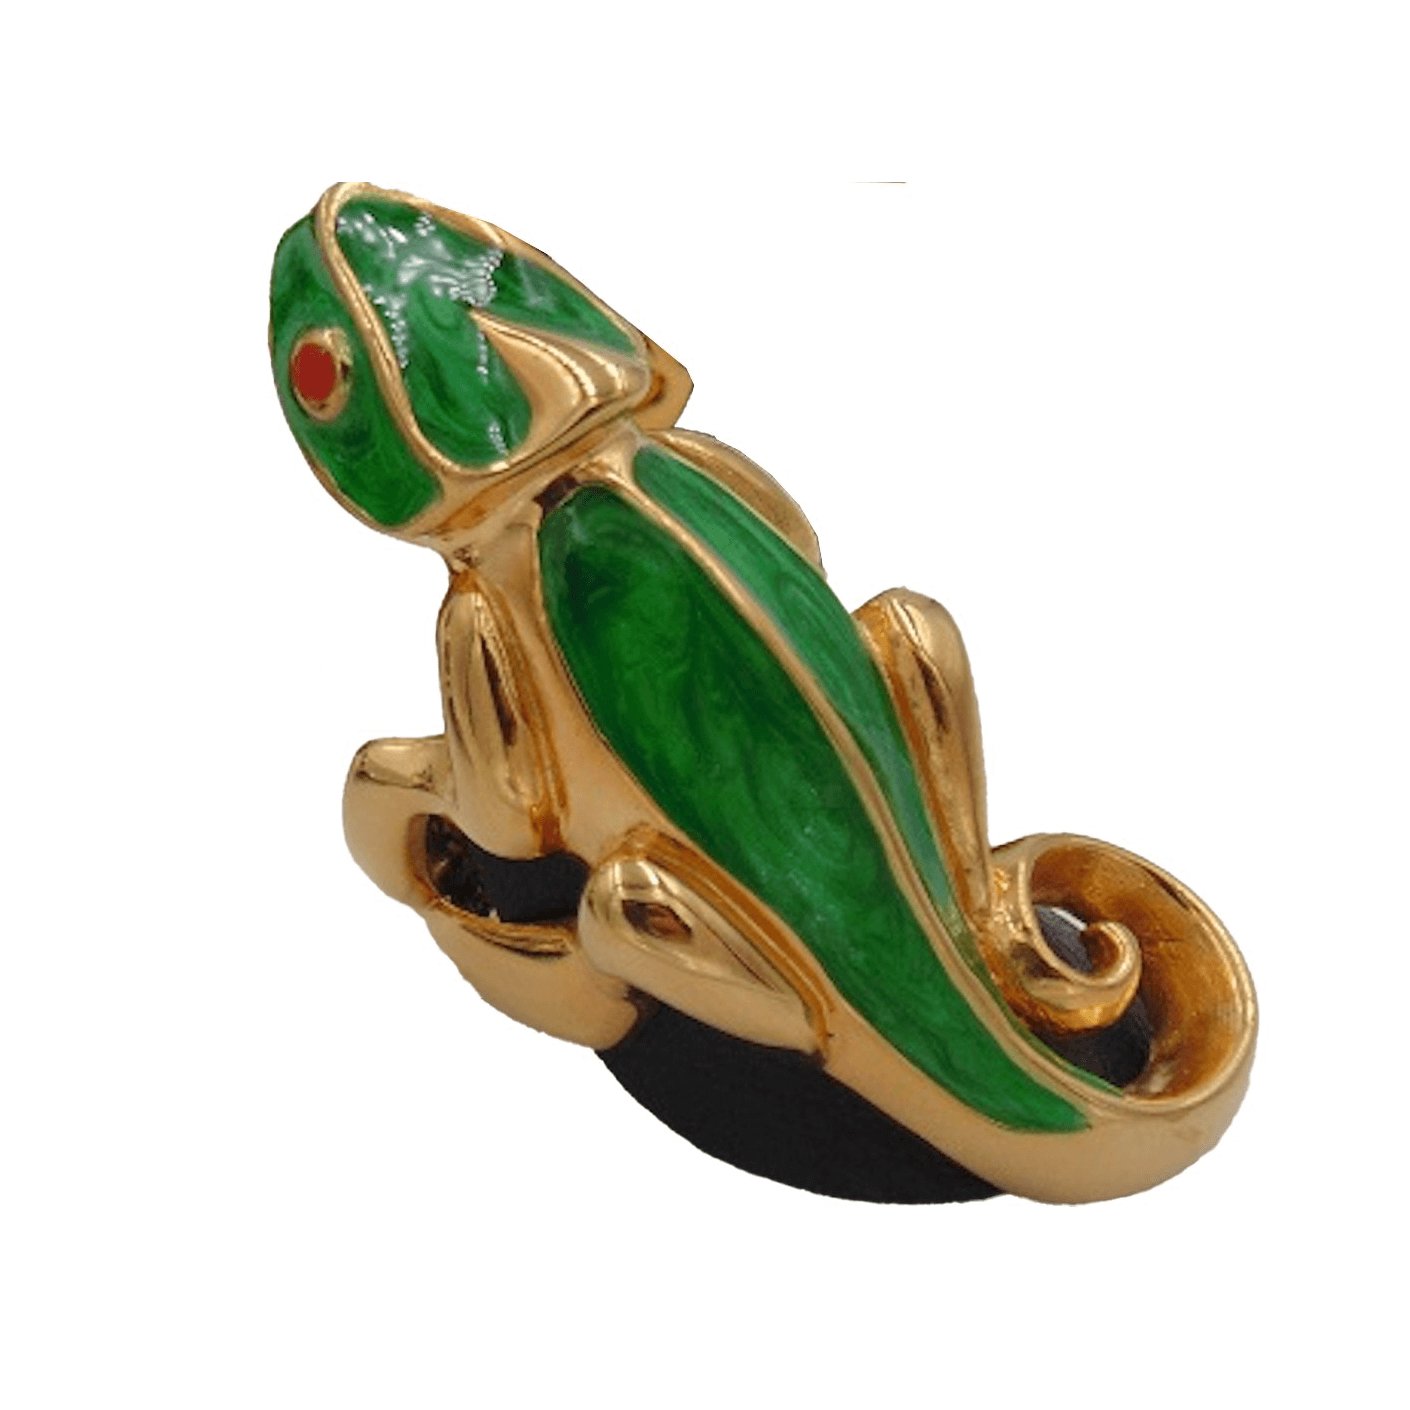 24k Gold Plated Bronze ring in the shape of a Chameleon. The ring has red eyes with green enamel details. The ring is displayed on black stand on white background